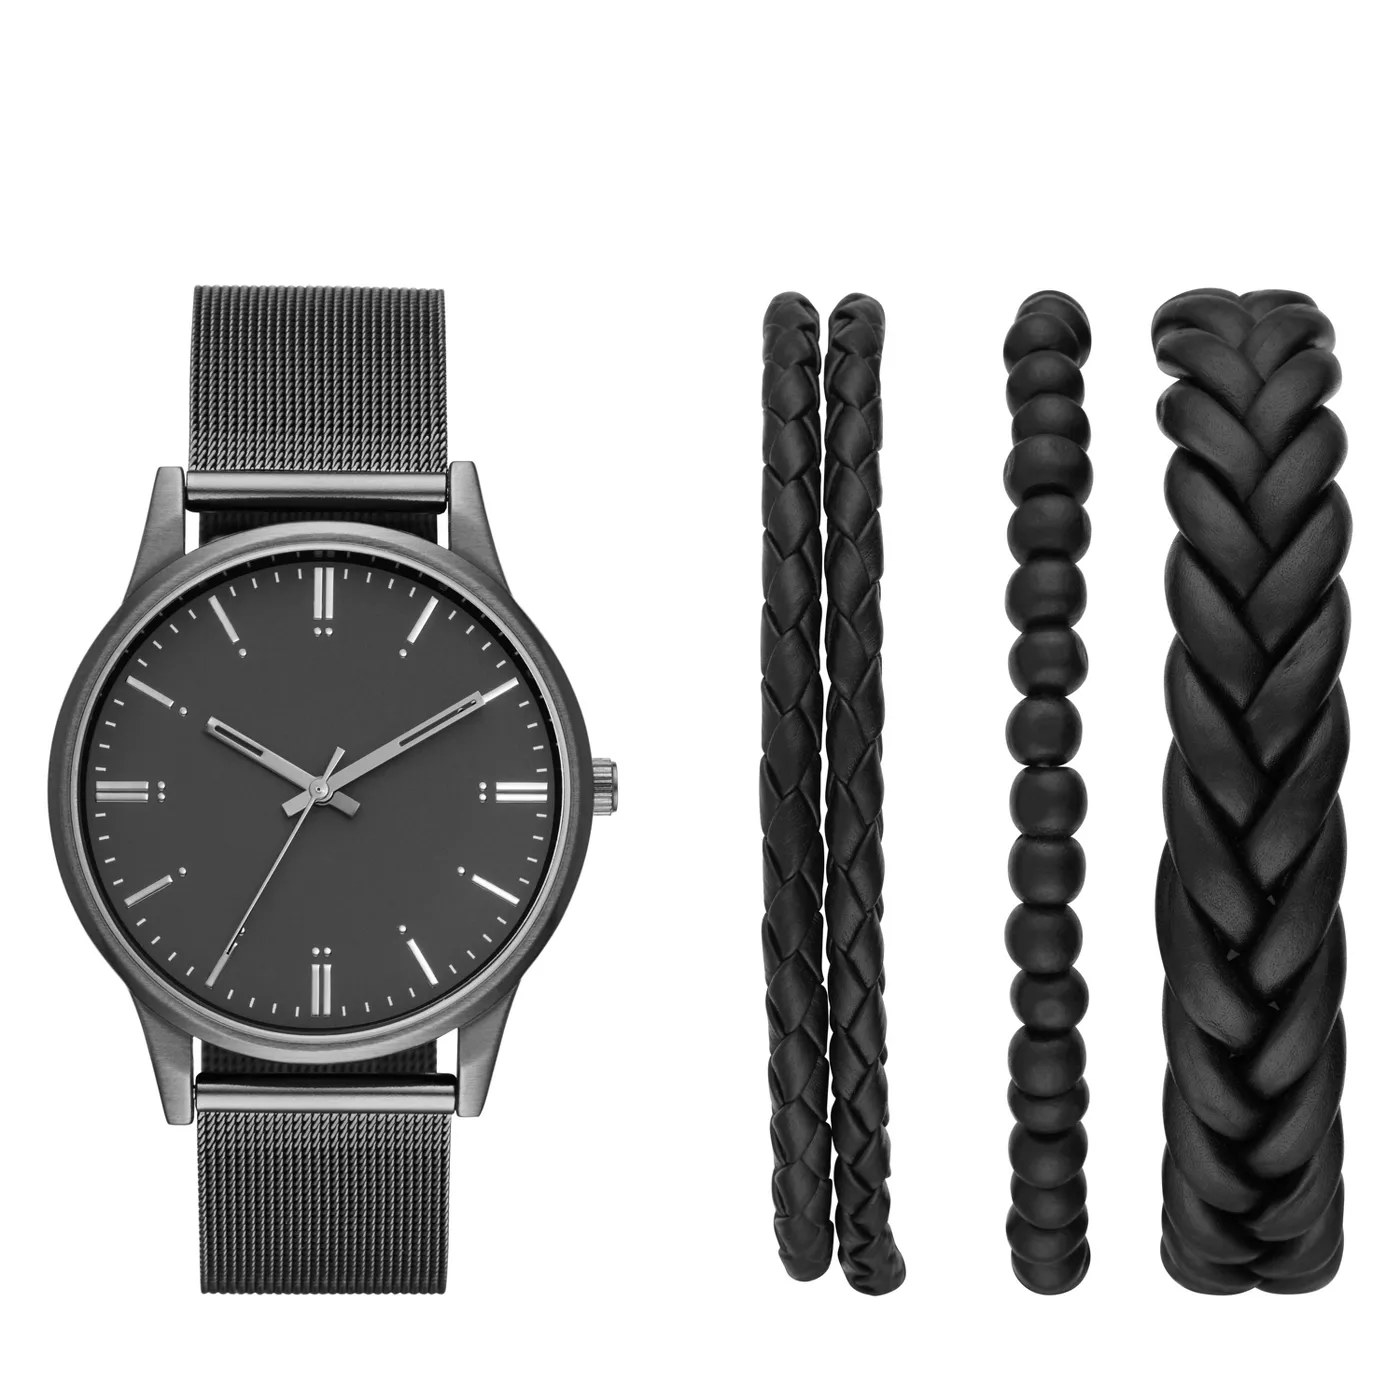 The mesh watch with three matching bracelets